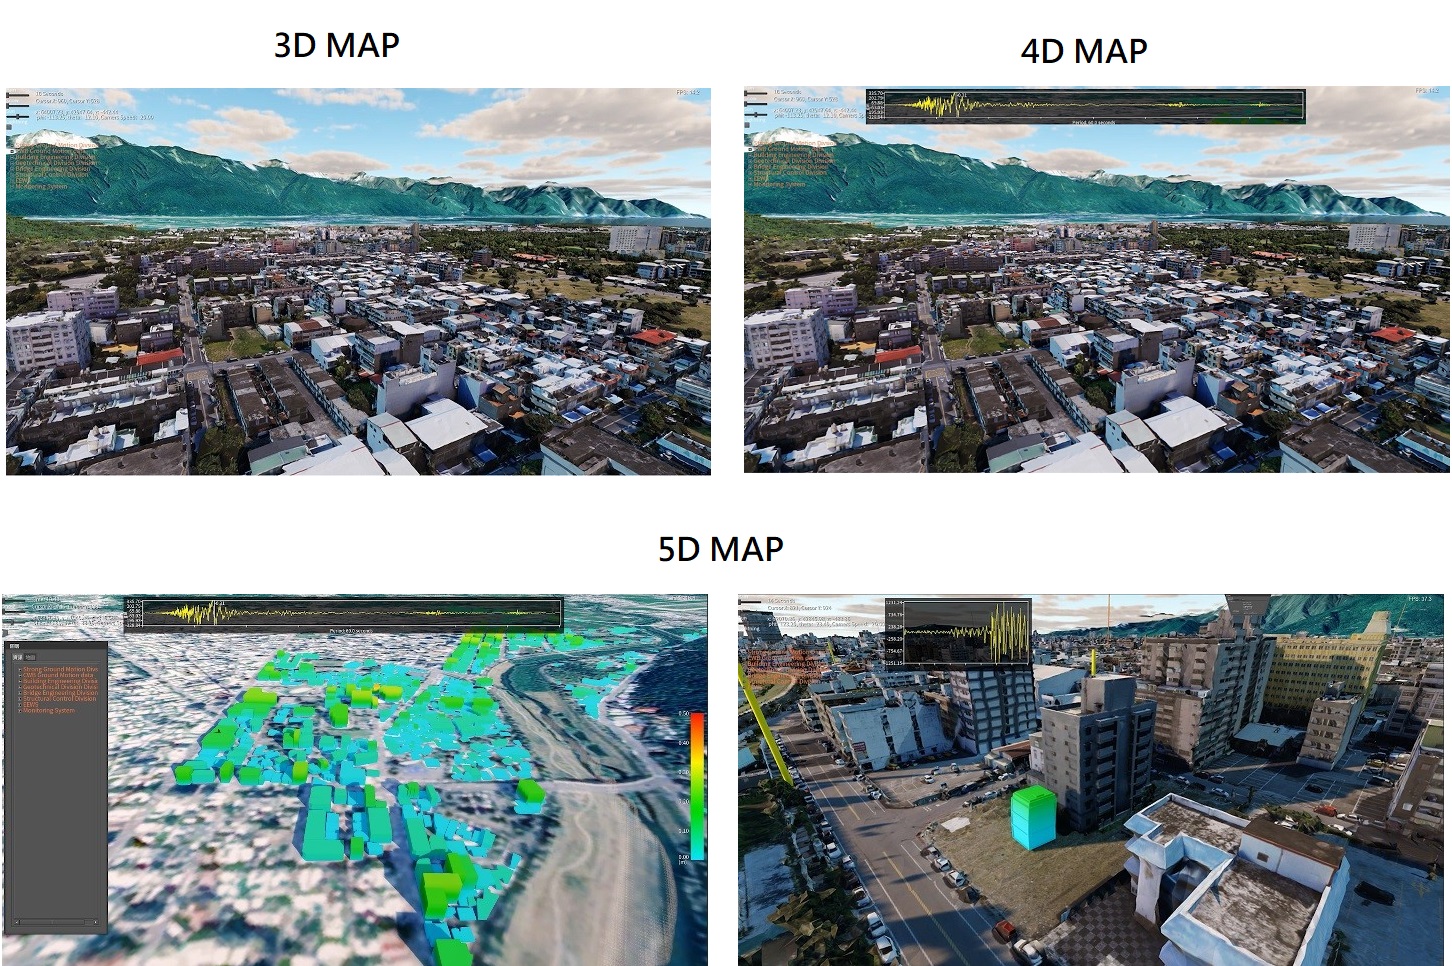 The above 3D map is an ordinary three-dimensional map of the city, while the 4D map shows the changes of seismic waves over time. NCREE's 